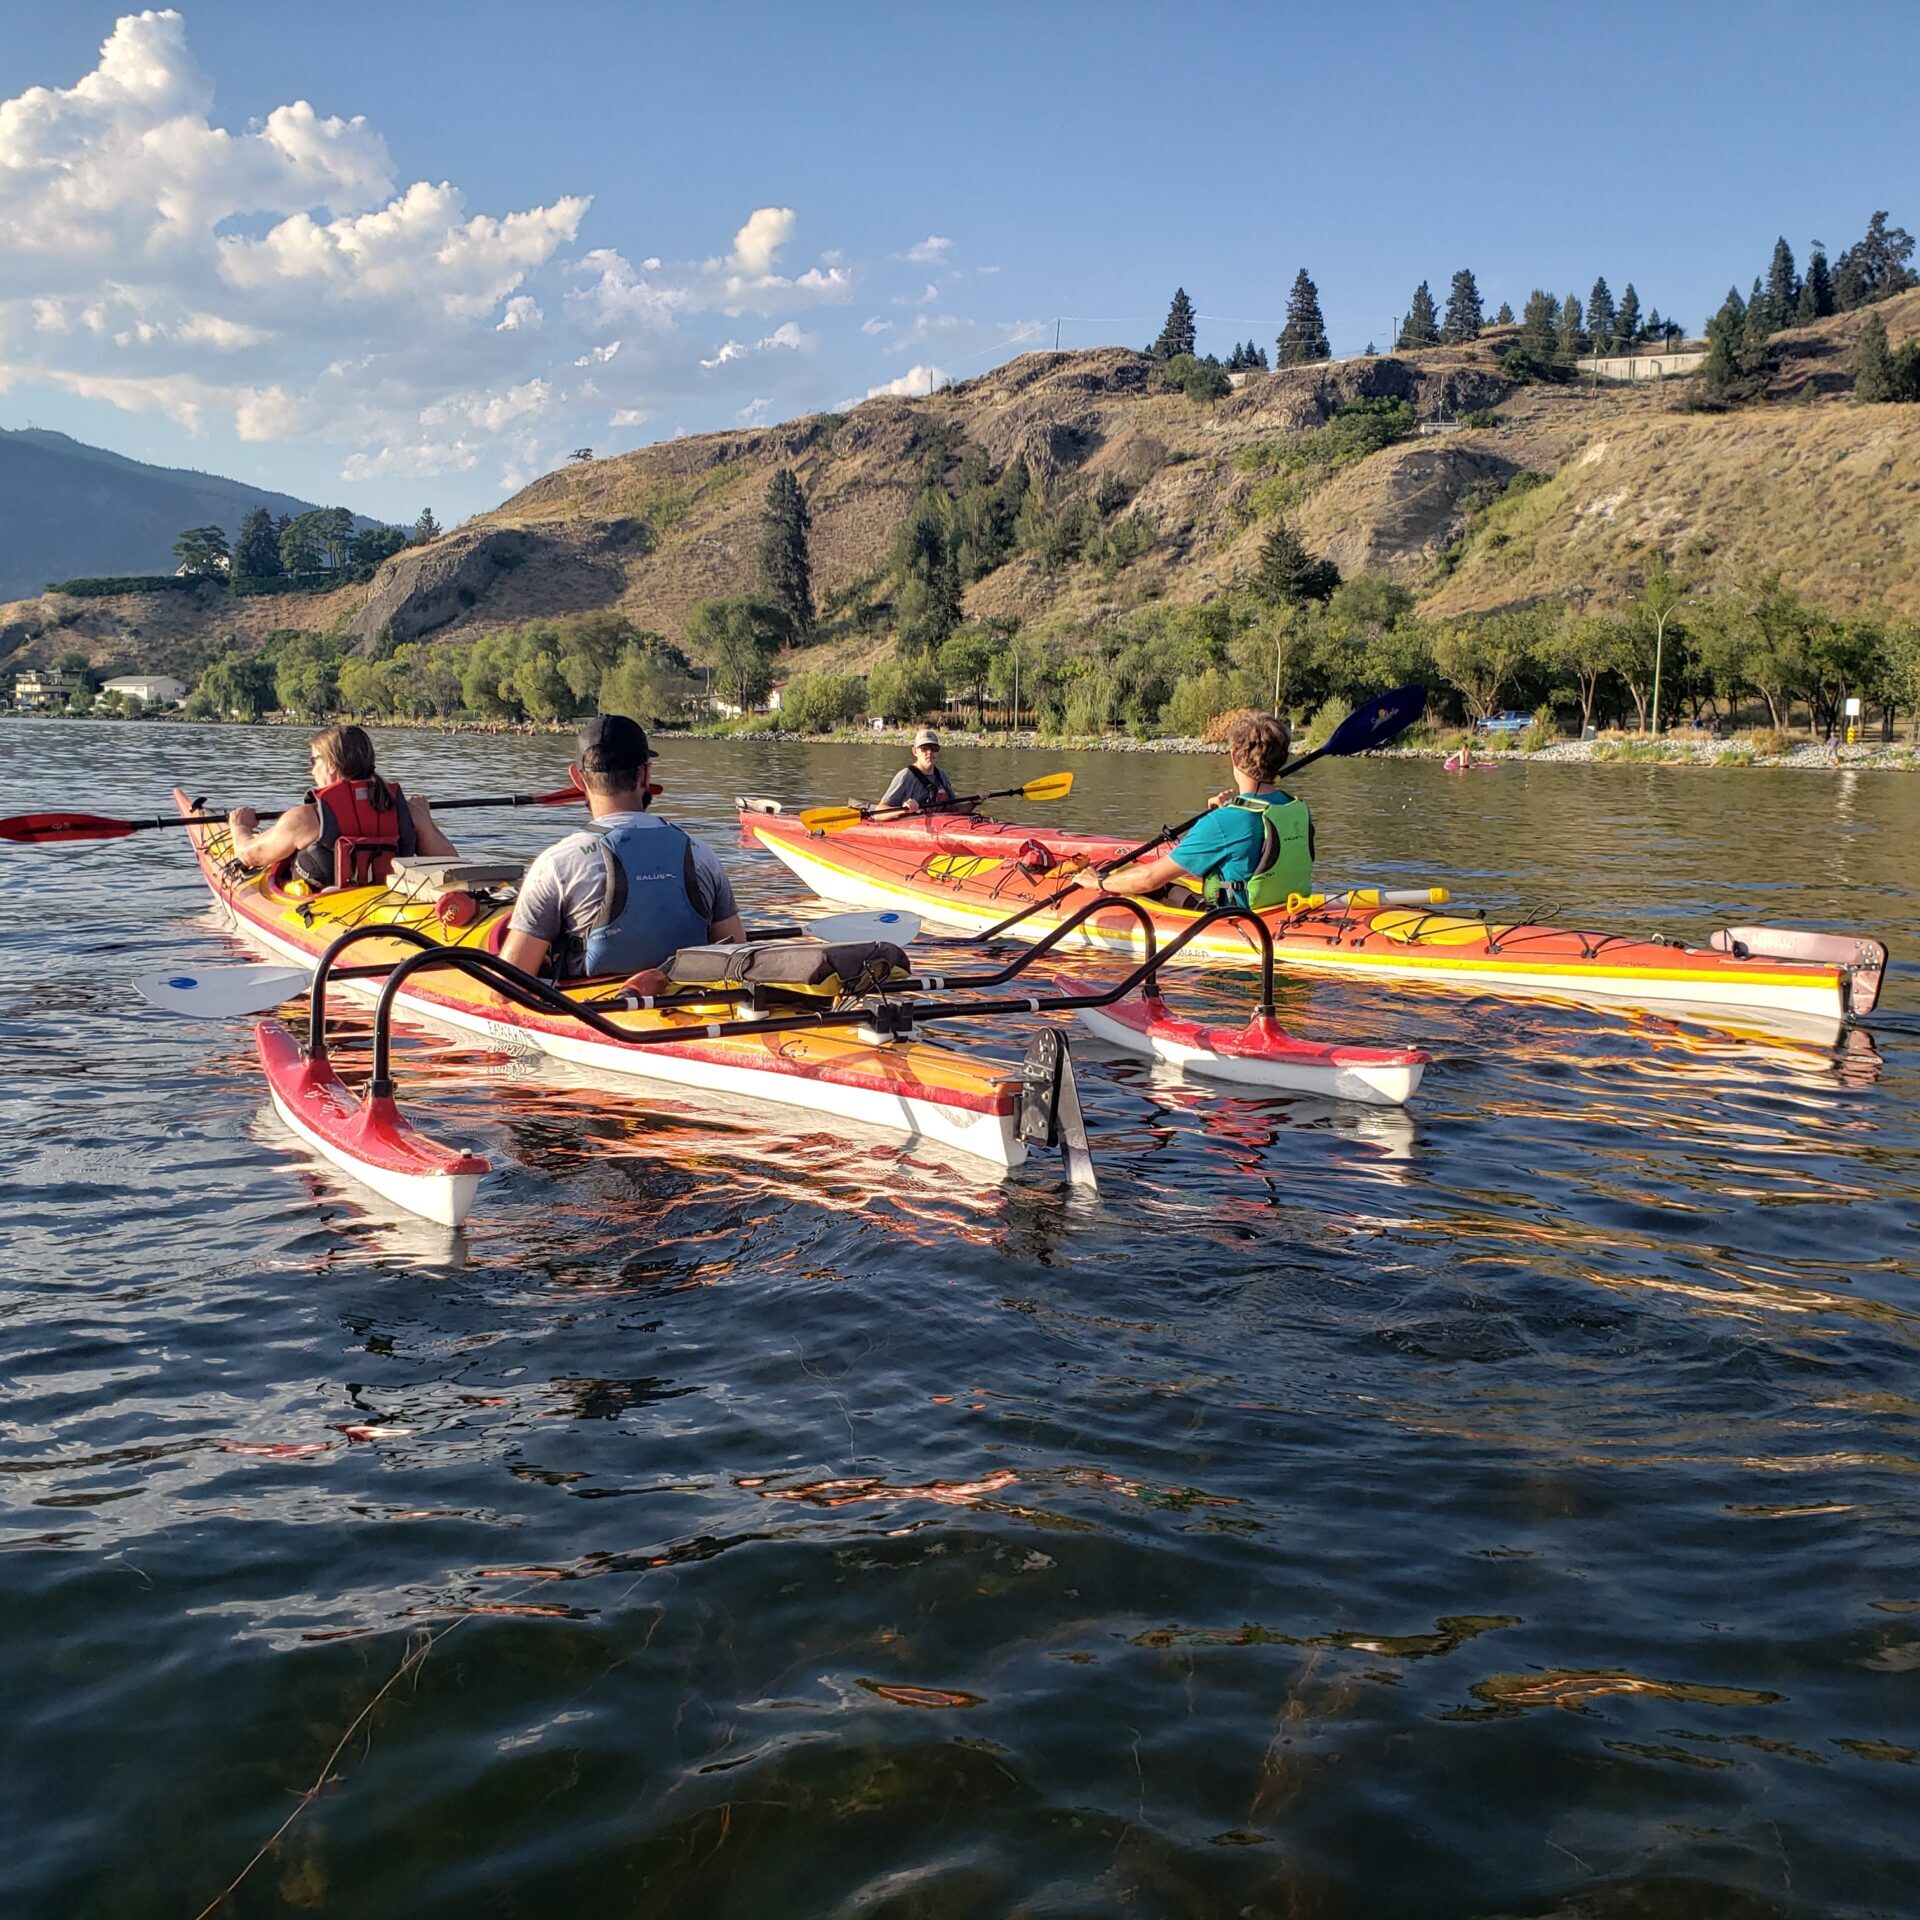 Two orange and yellow kayaks. One is a tandem kayak with two pontoons on the back. The picture is taken from behind so the user's faces are not visible.